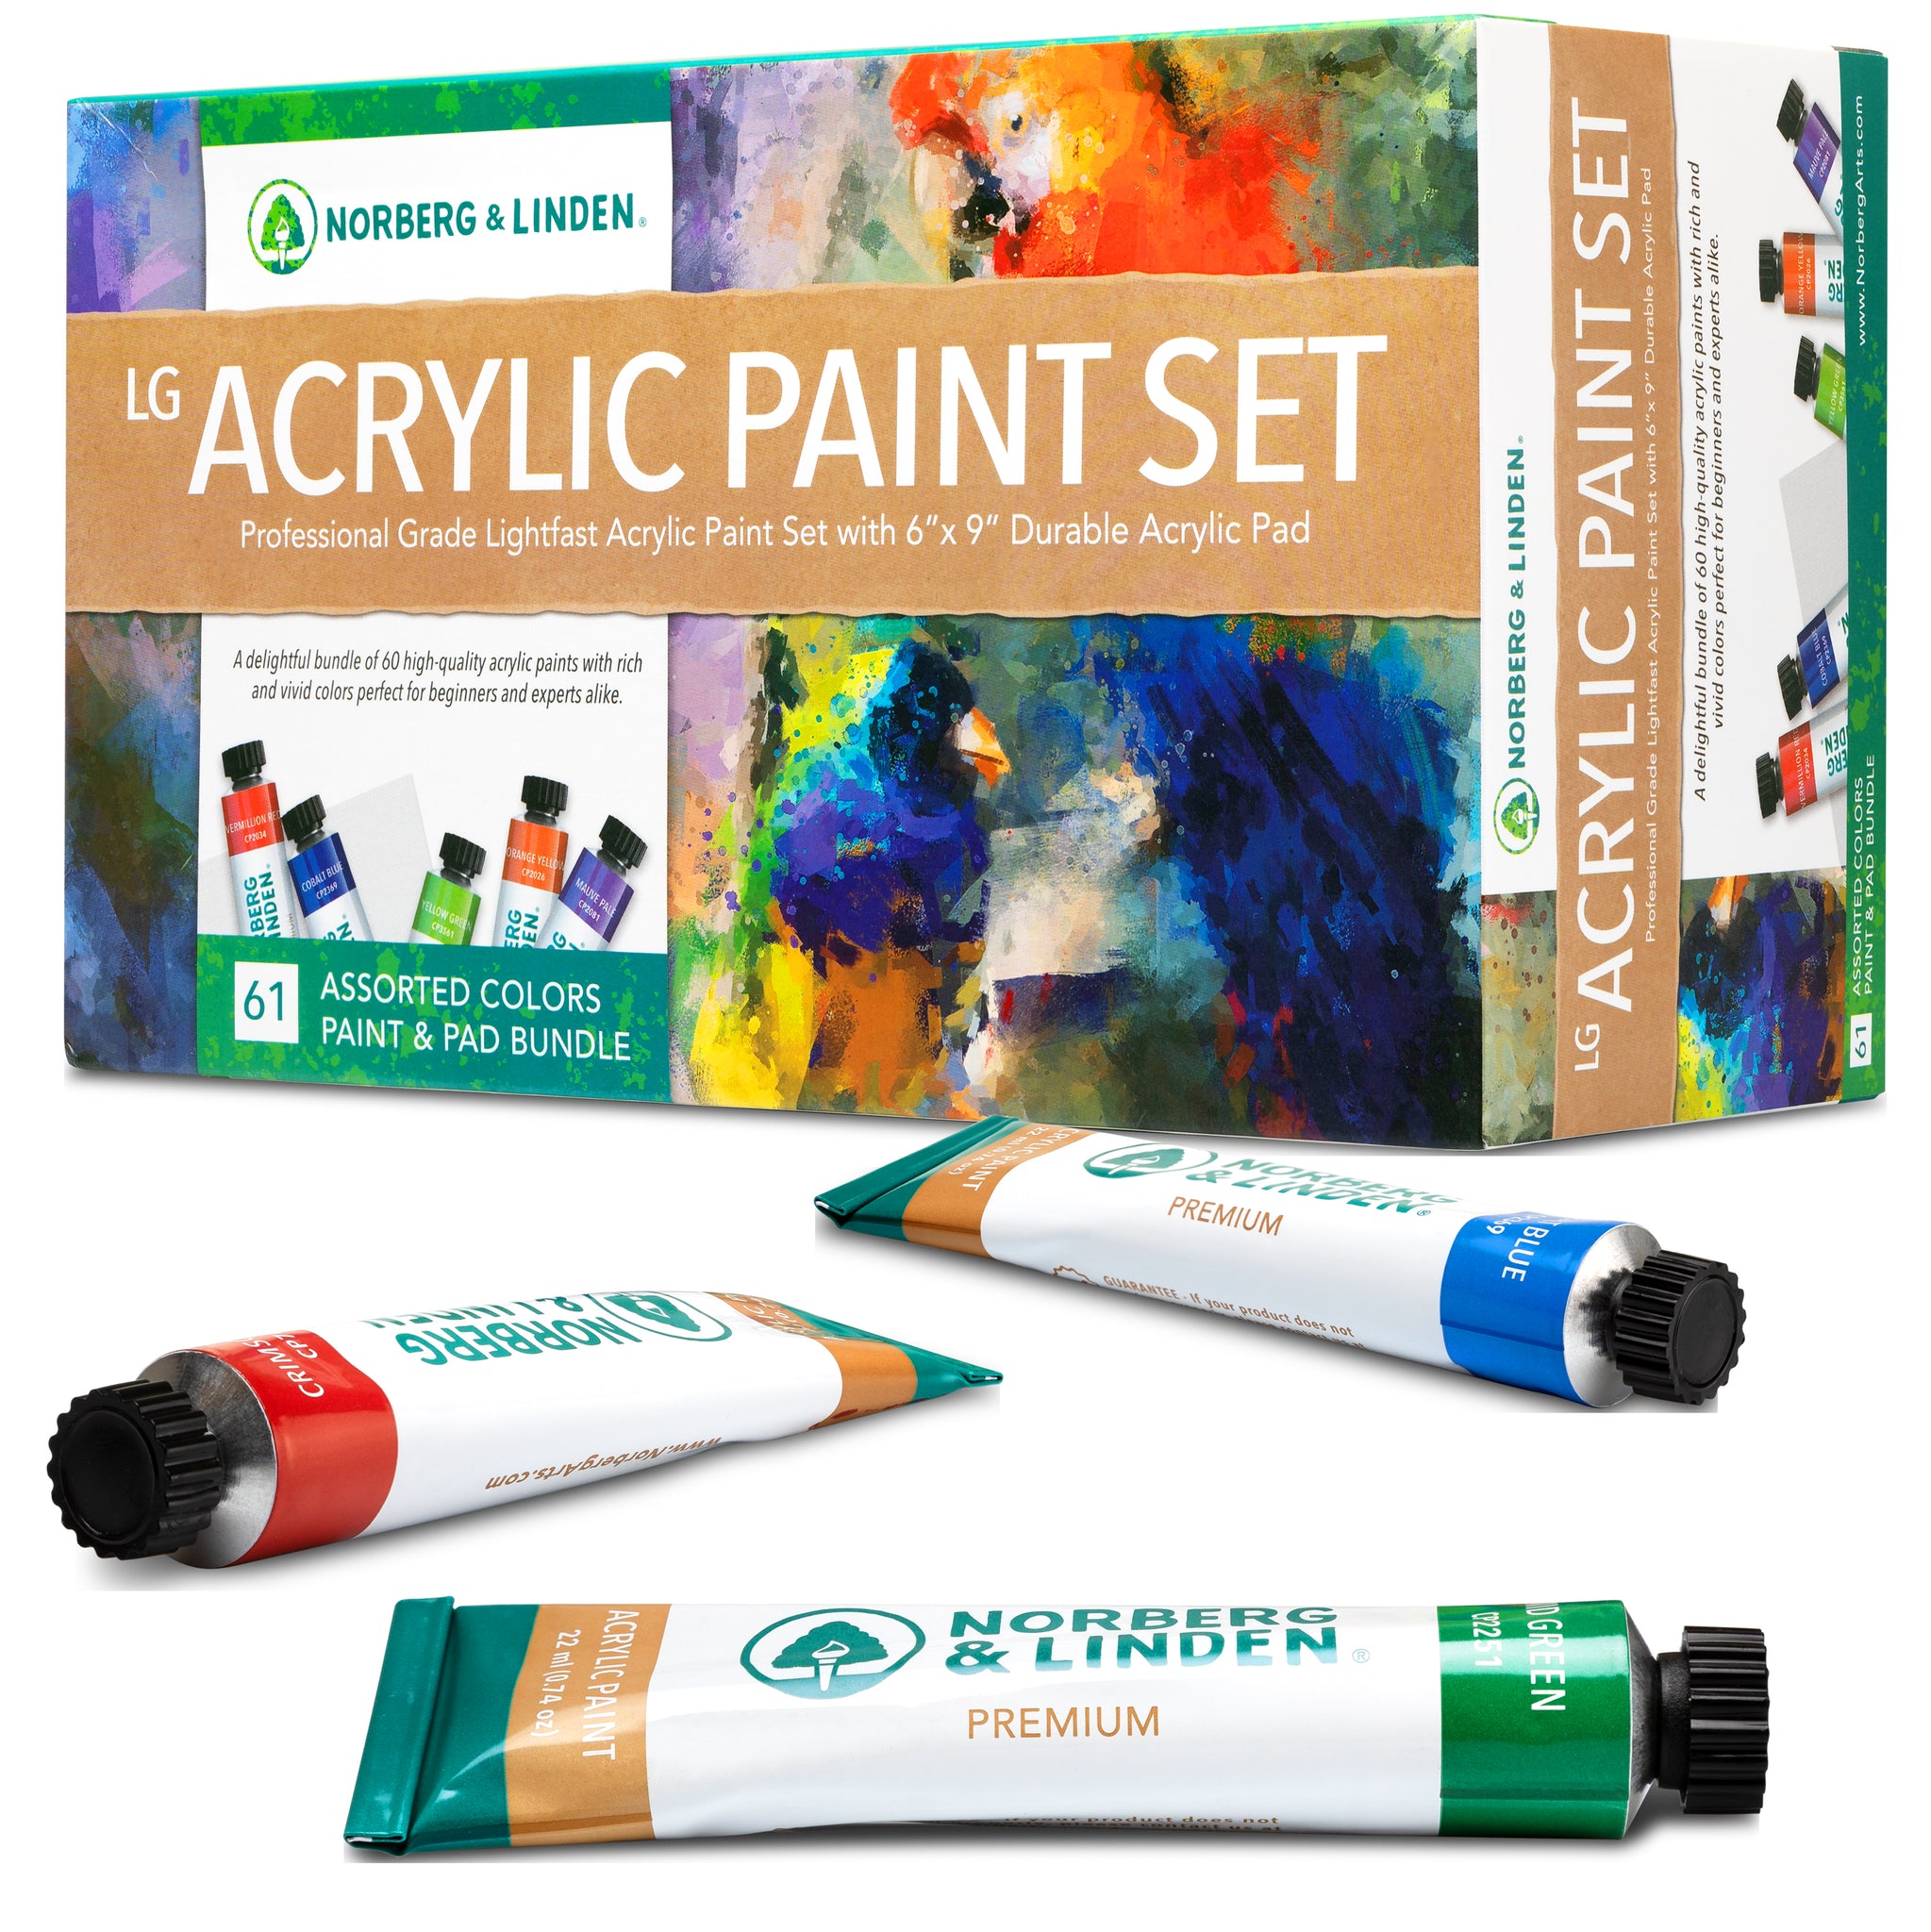 Norberg & Linden Acrylic Paint Set - Canvas and Acrylic Paint Sets for  Adults, Teens, Kids - Arts Crafts Painting Kit with Supplies - Includes 12